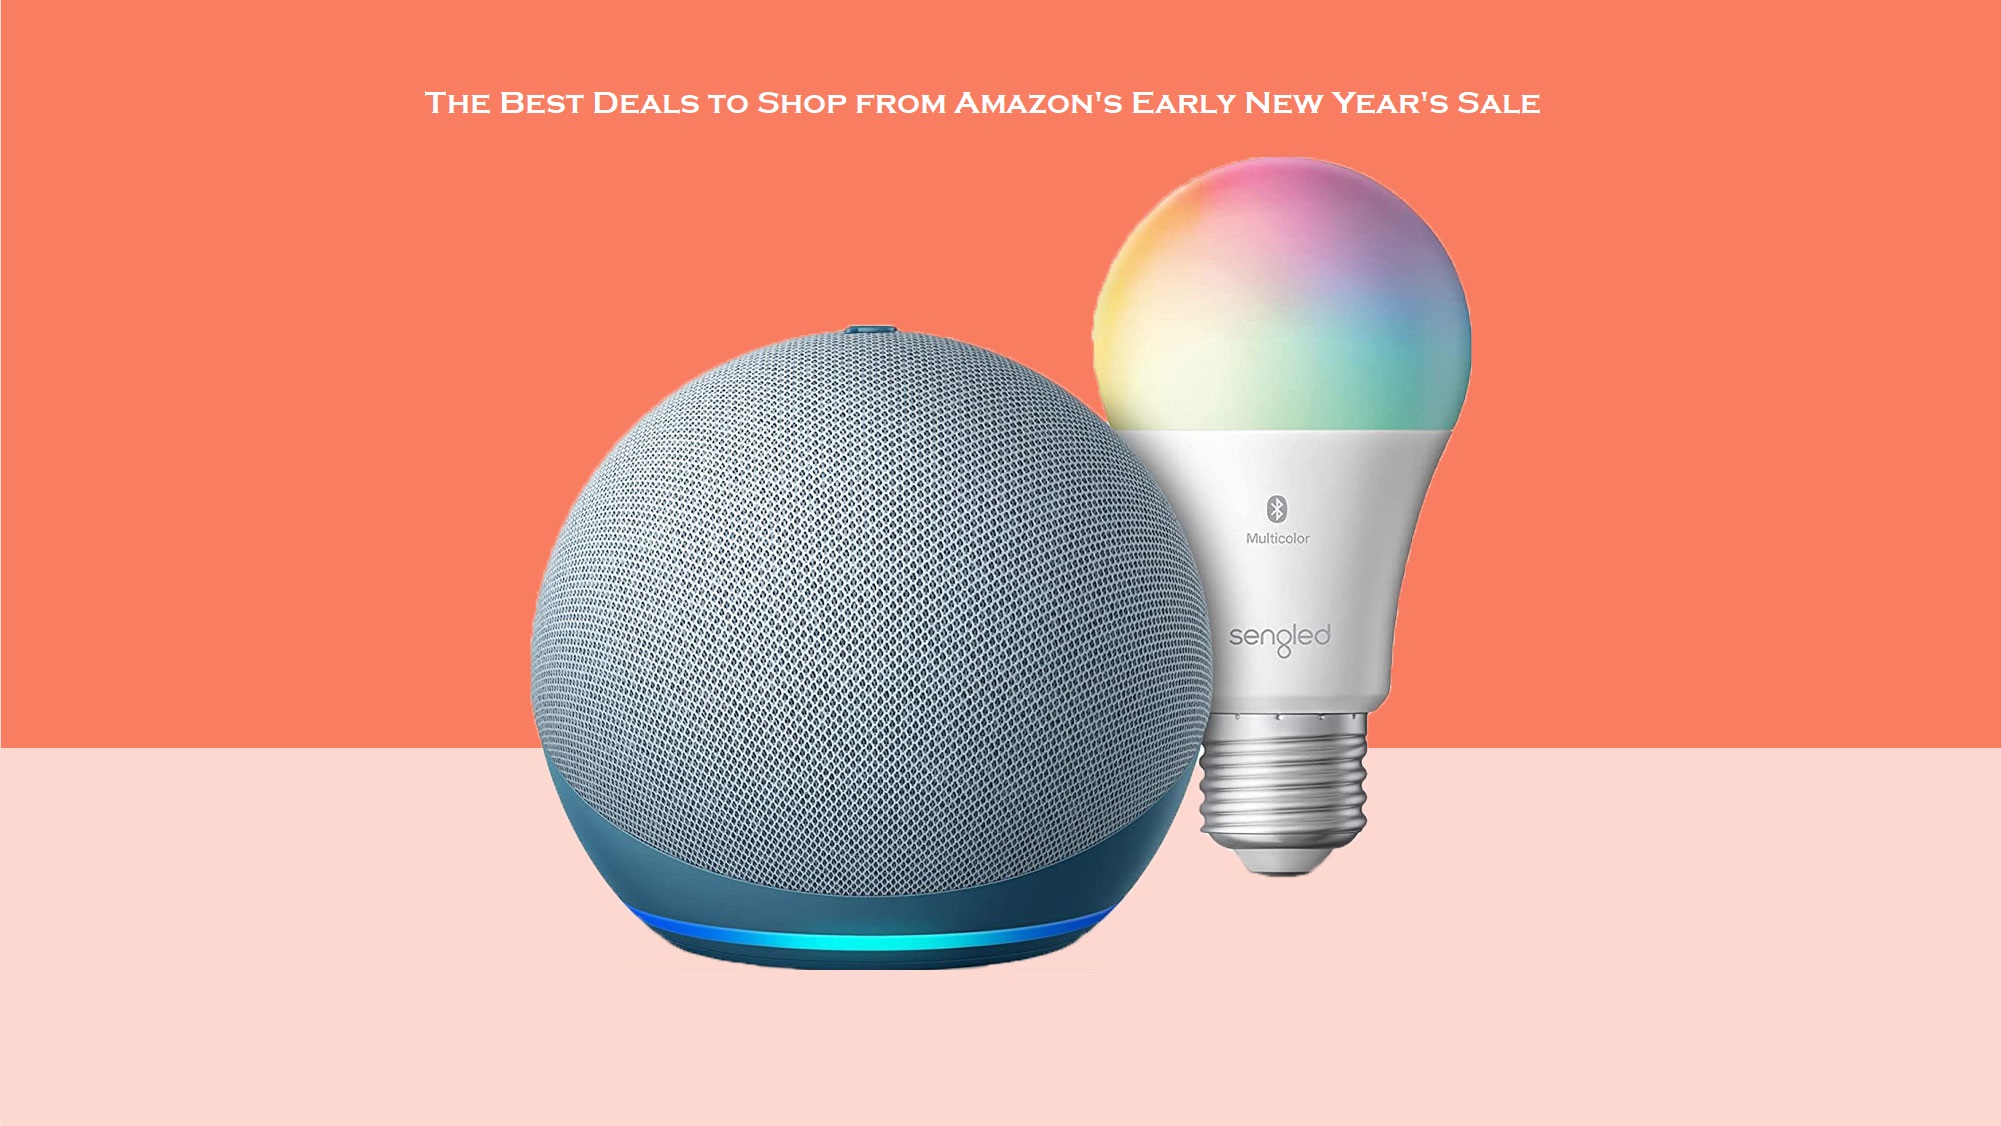 The Best Deals to Shop from Amazon's Early New Year's Sale